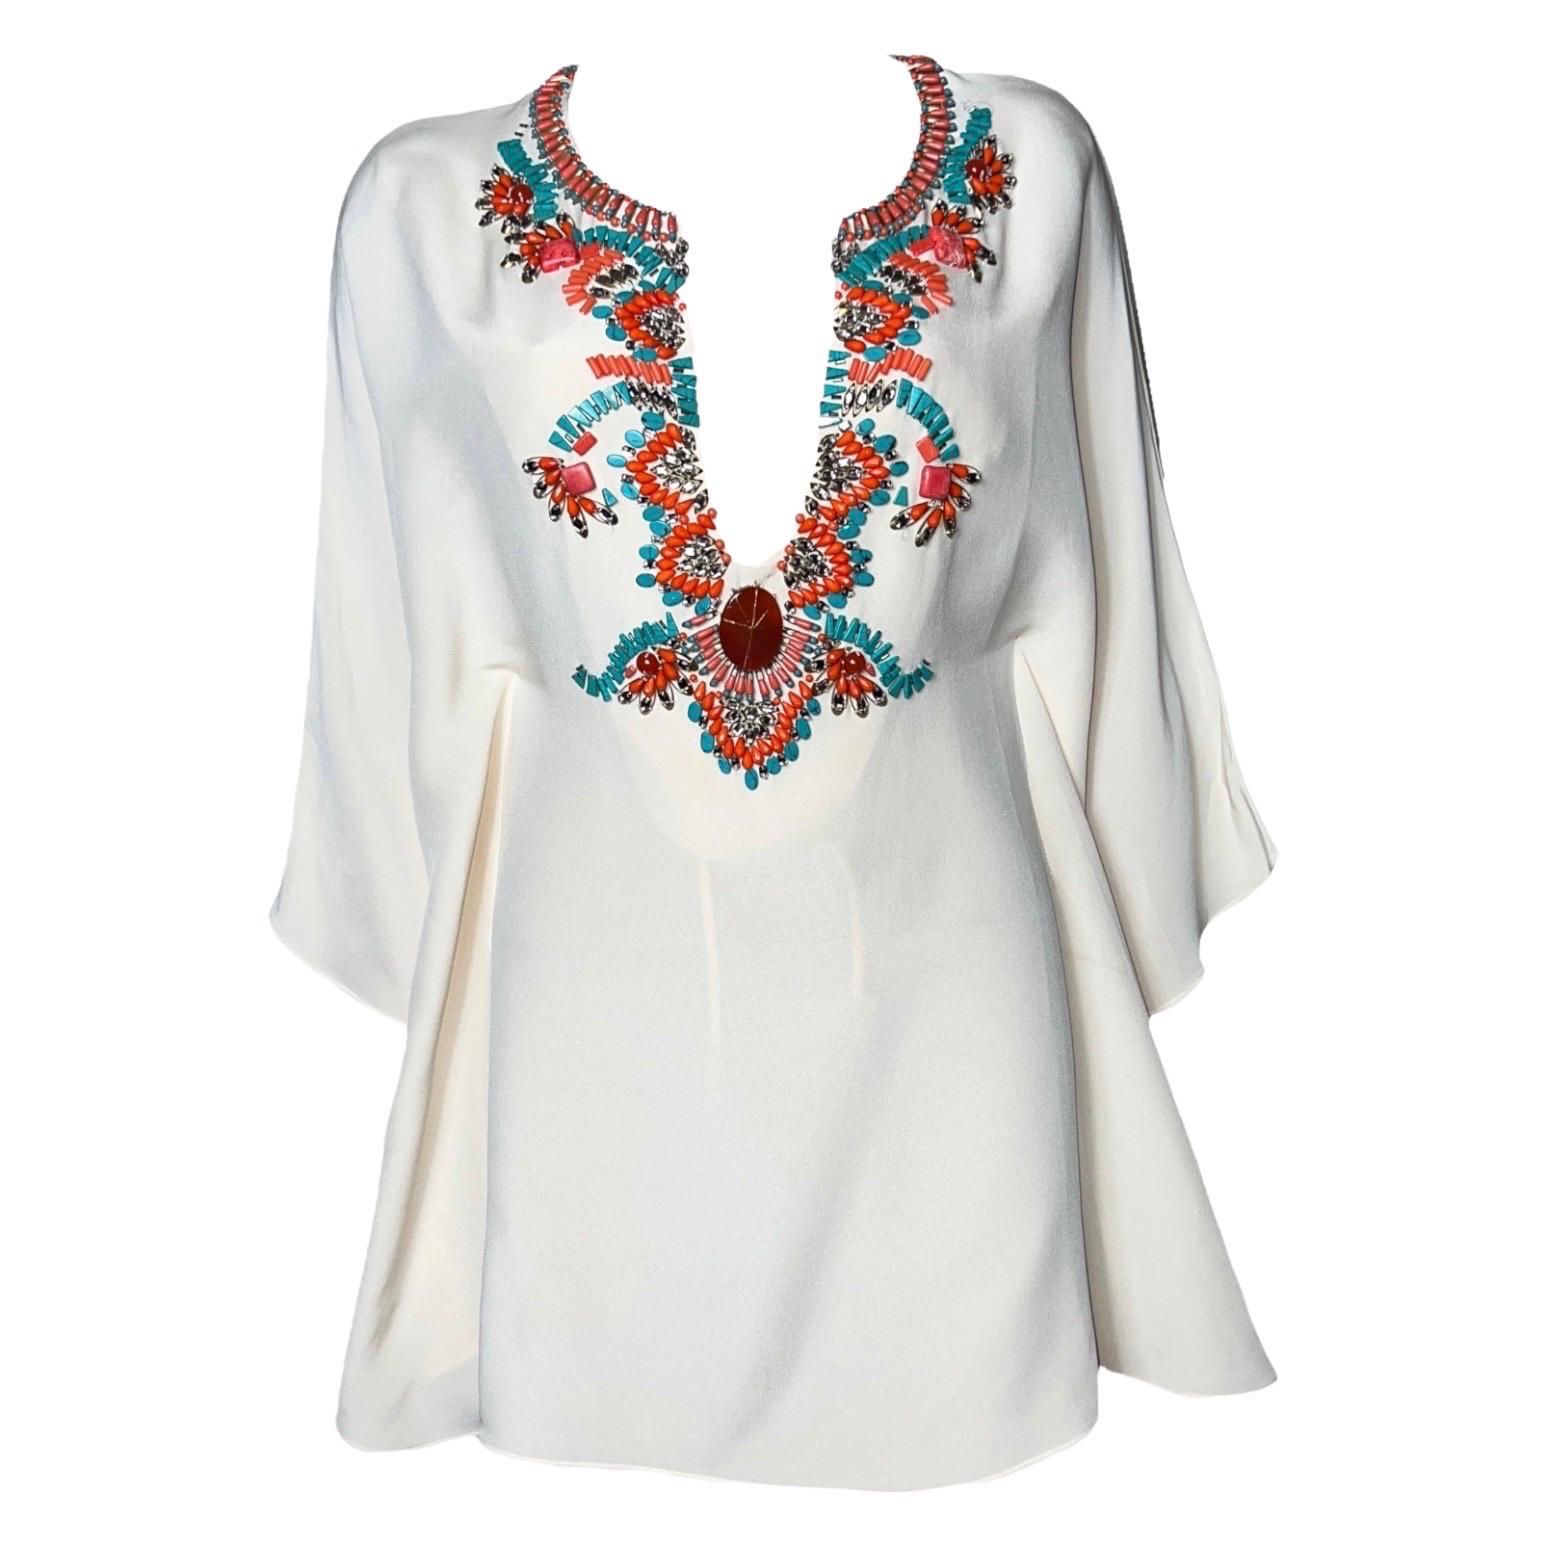 Emilio Pucci's embroidered kaftan is perfect for chic summer parties. Crafted in Italy from luxurious cream silk-cady, this design has an amazing fit, front ties and embellishments made from colorful beads and crystals. Team yours with a clutch and